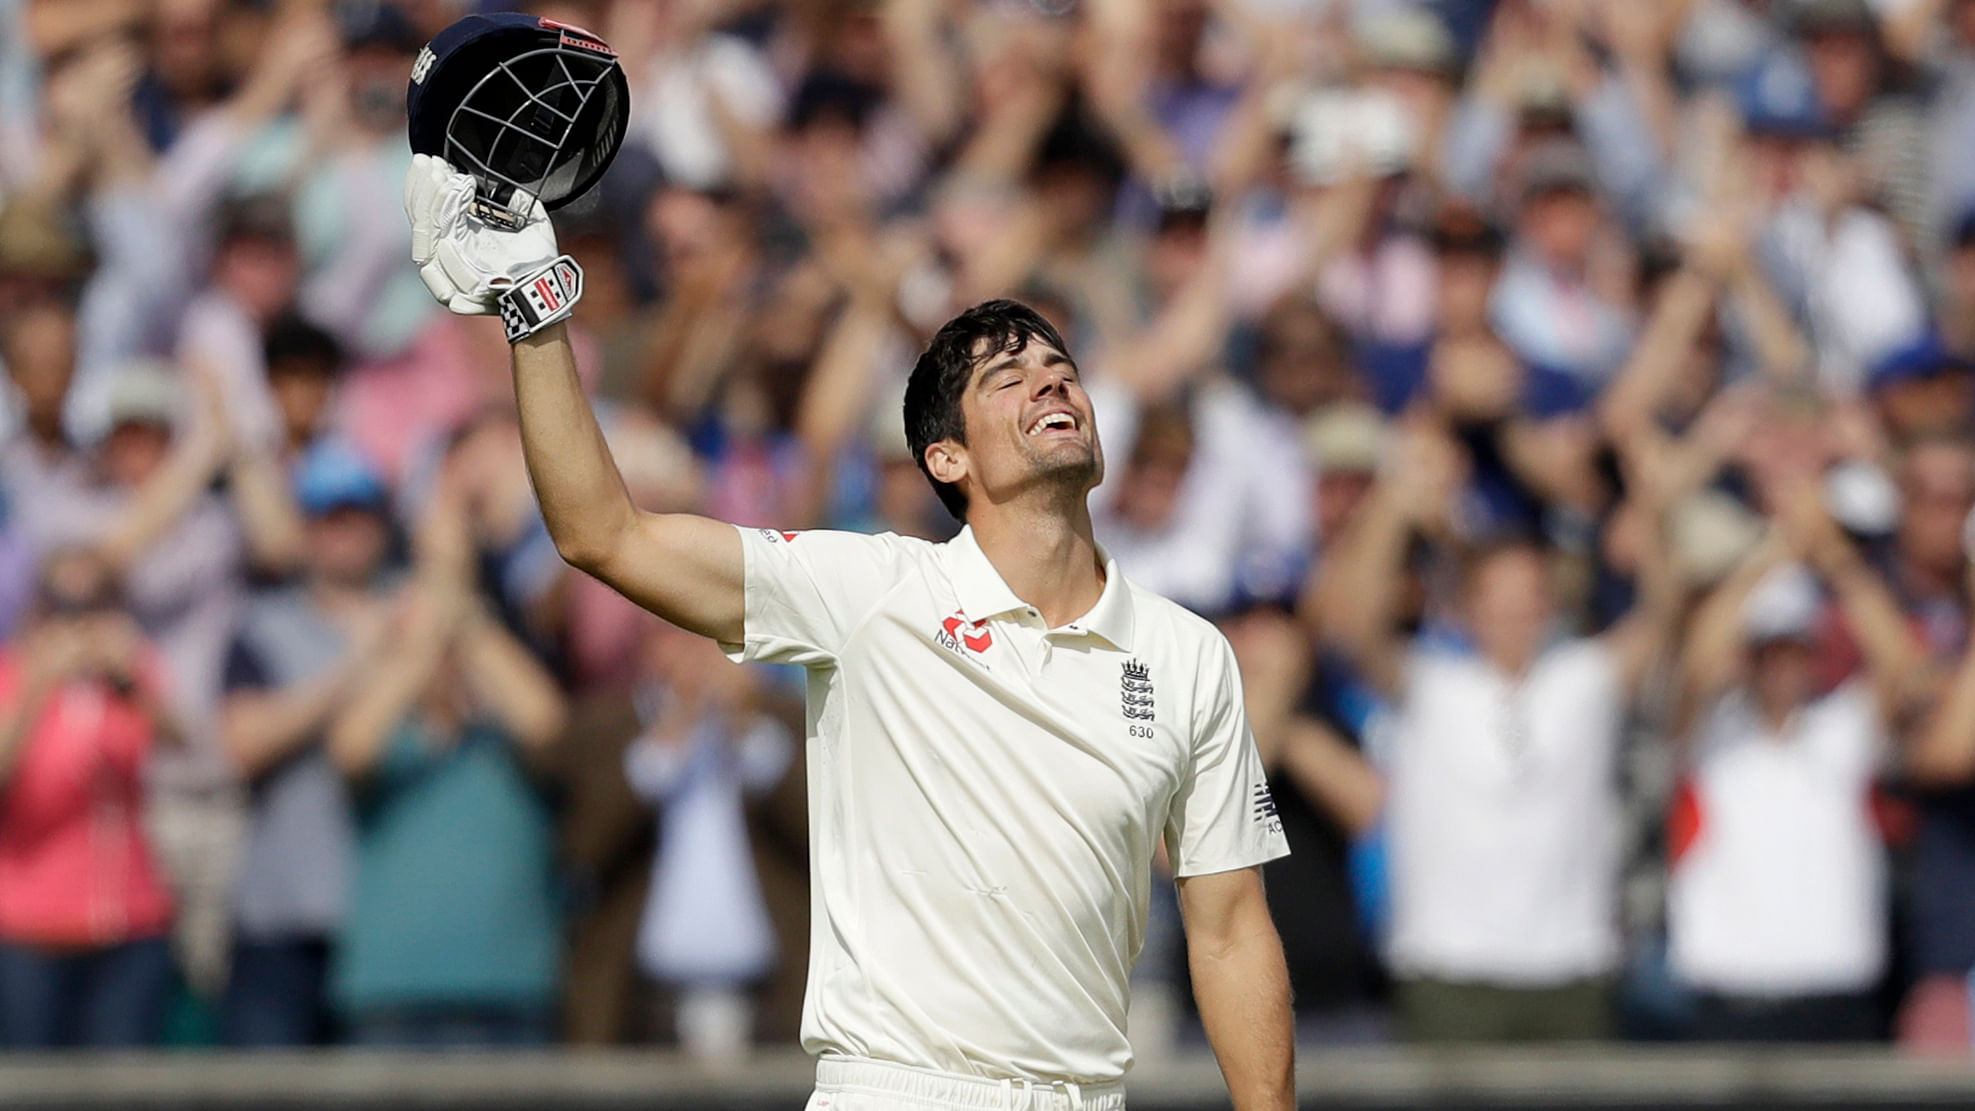 Former England opener Alastair Cook and ex-West Indies team manager Ricky Skerritt on Tuesday, 28 January became the new members of MCC’s World Cricket Committee.